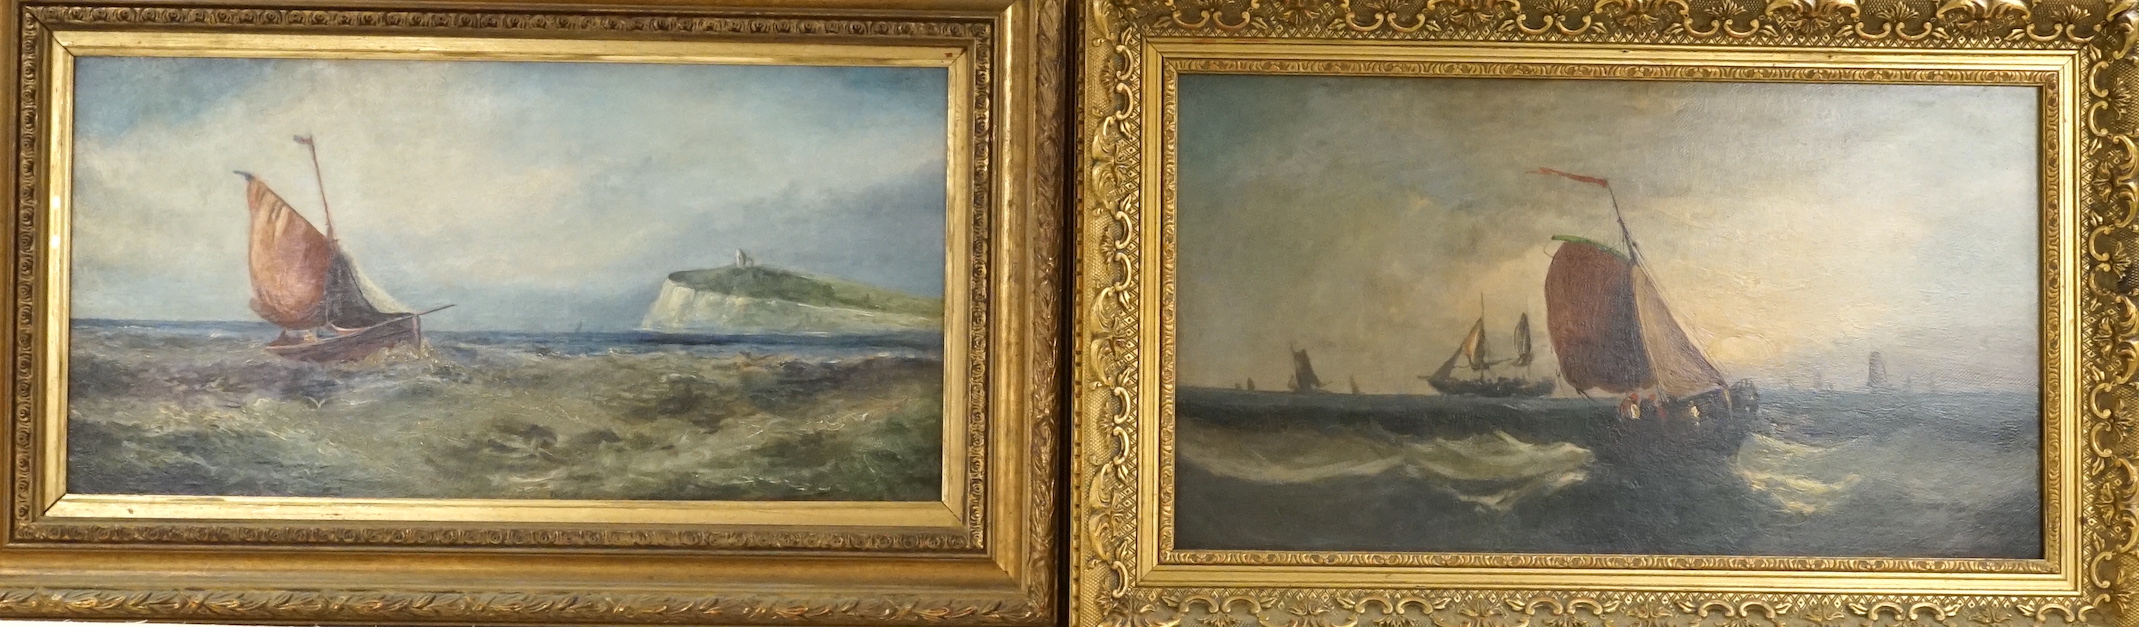 After William Henry Williamson (1820-1883), two oils on canvas, Fishing boats at sea, indistinctly signed, 24 x 44.5cm and 22 x 44.5cm, frames differ